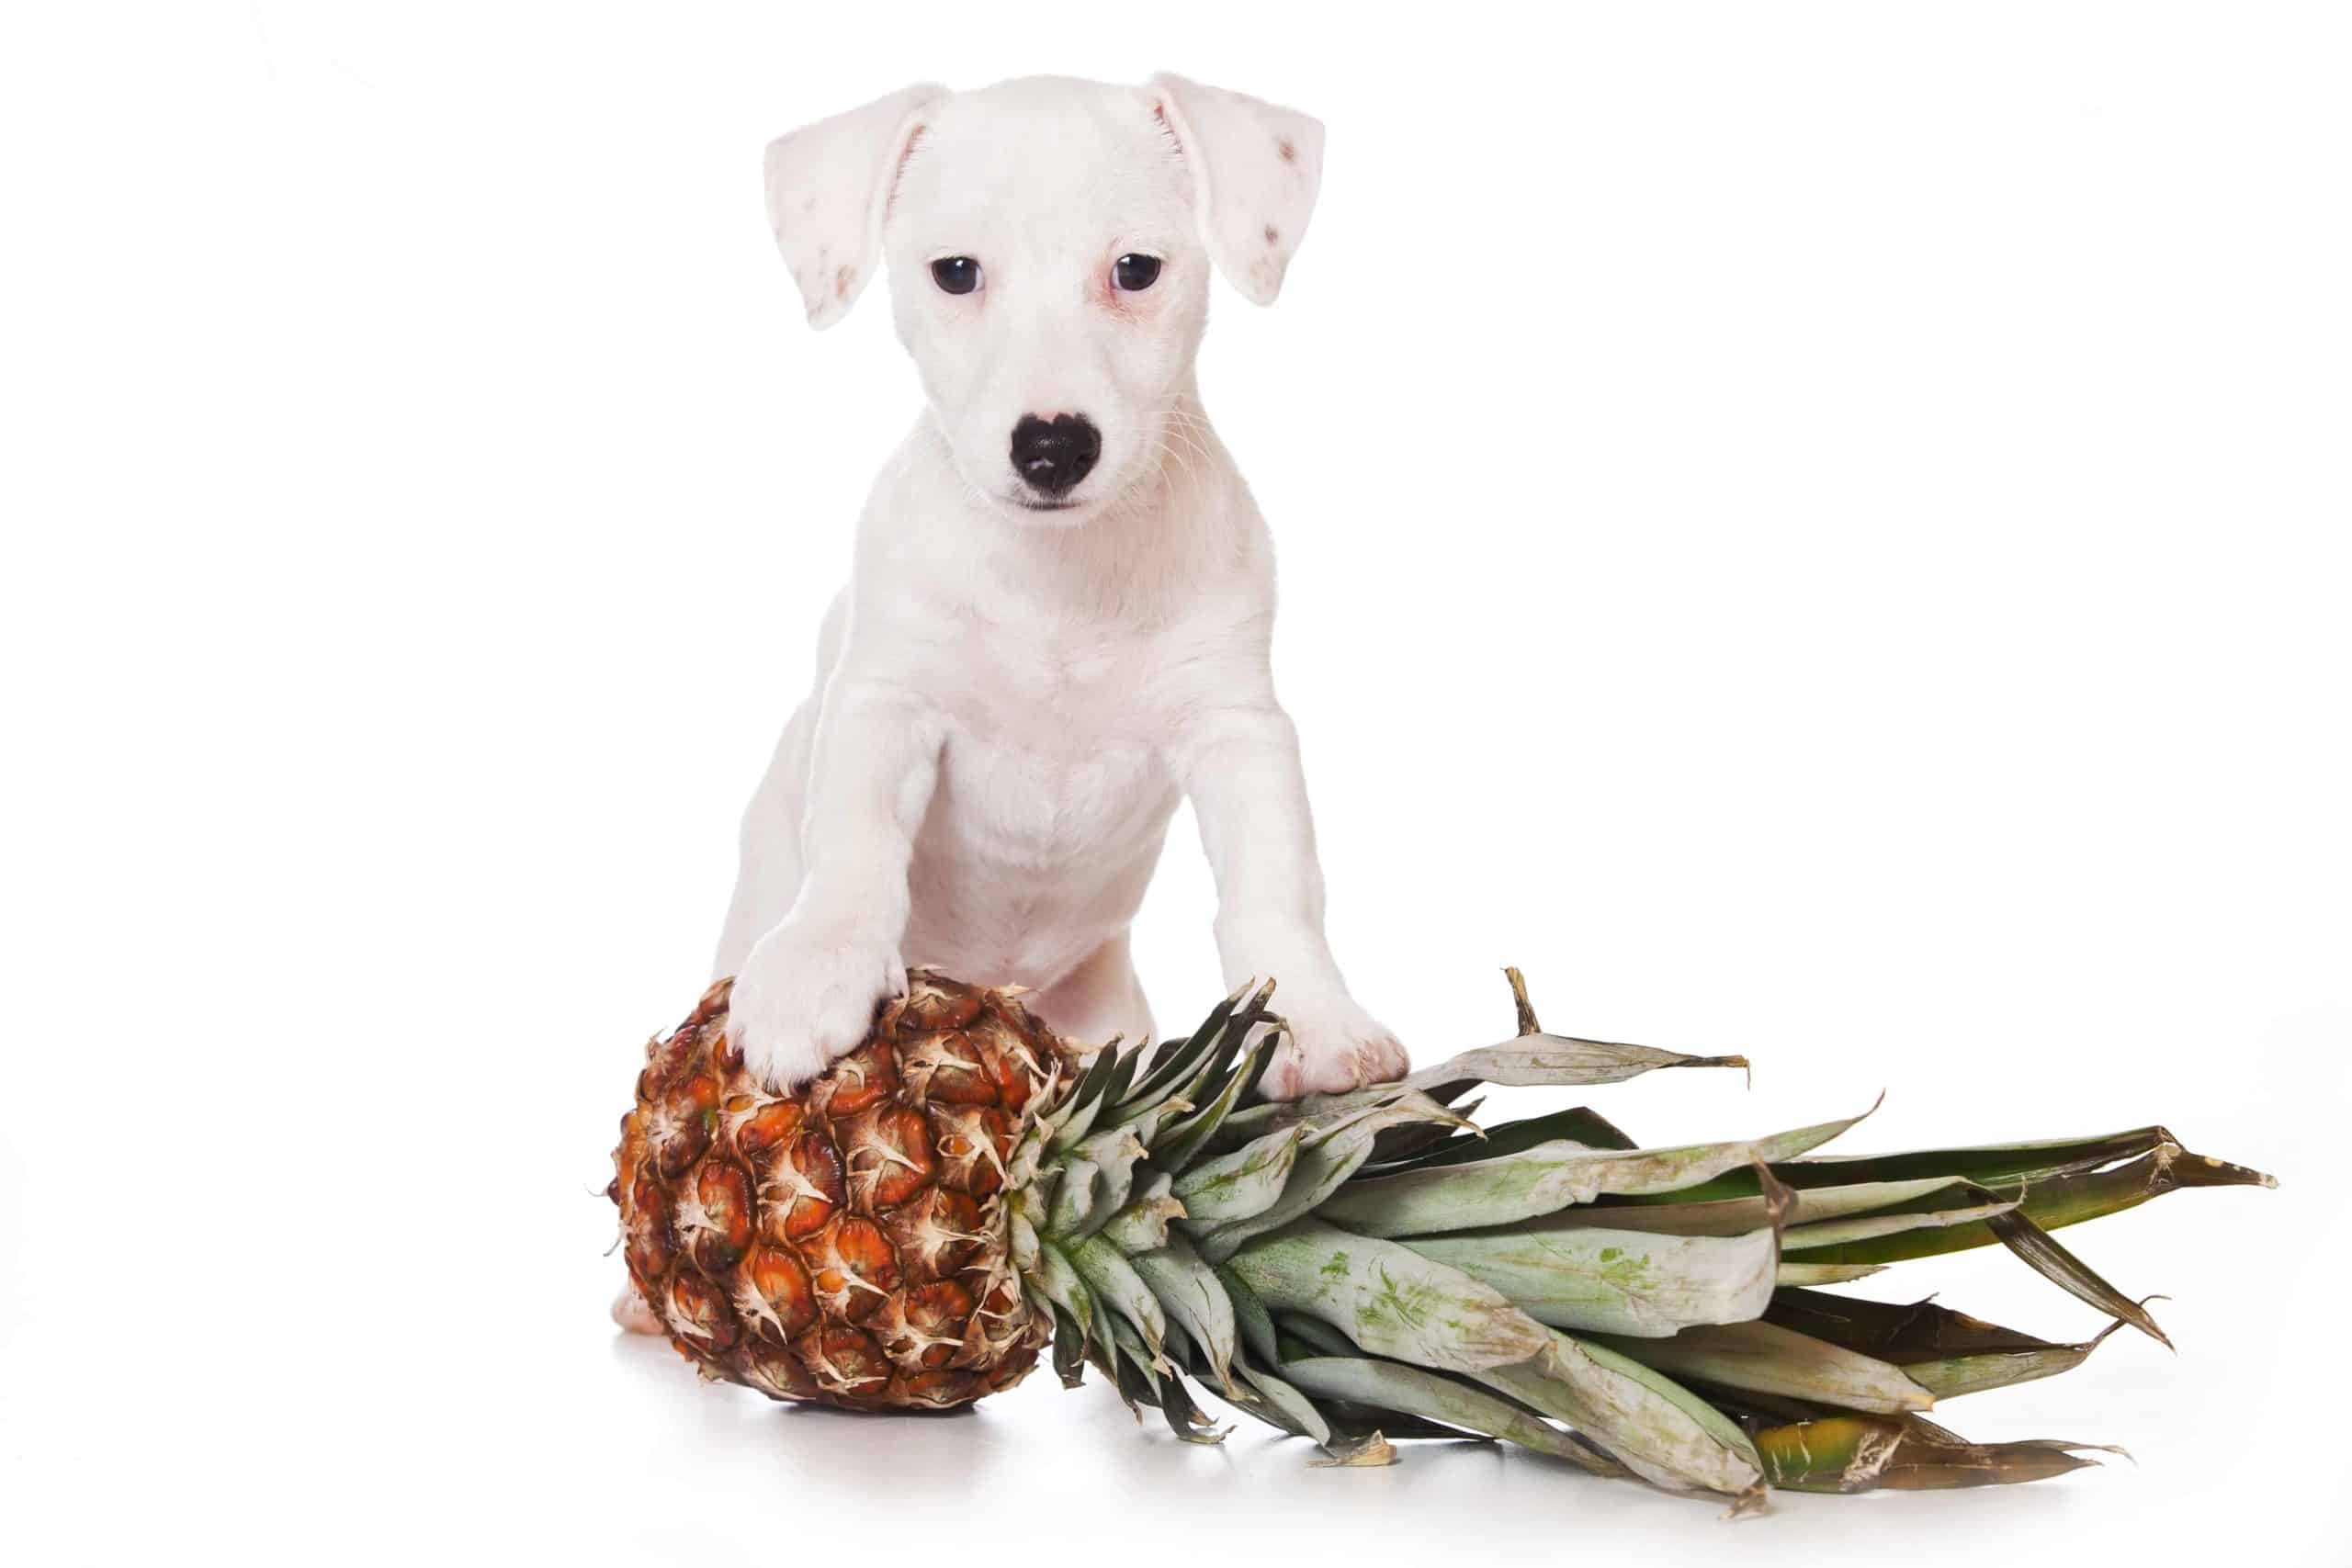 Small white dog sits with pineapple. Start by checking with your veterinarian to determine if eating pineapple can exacerbate any underlying conditions. Before feeding pineapple to your dog, start by peeling and coring the fruit. Discard the peel and core where your dog can't reach it. 